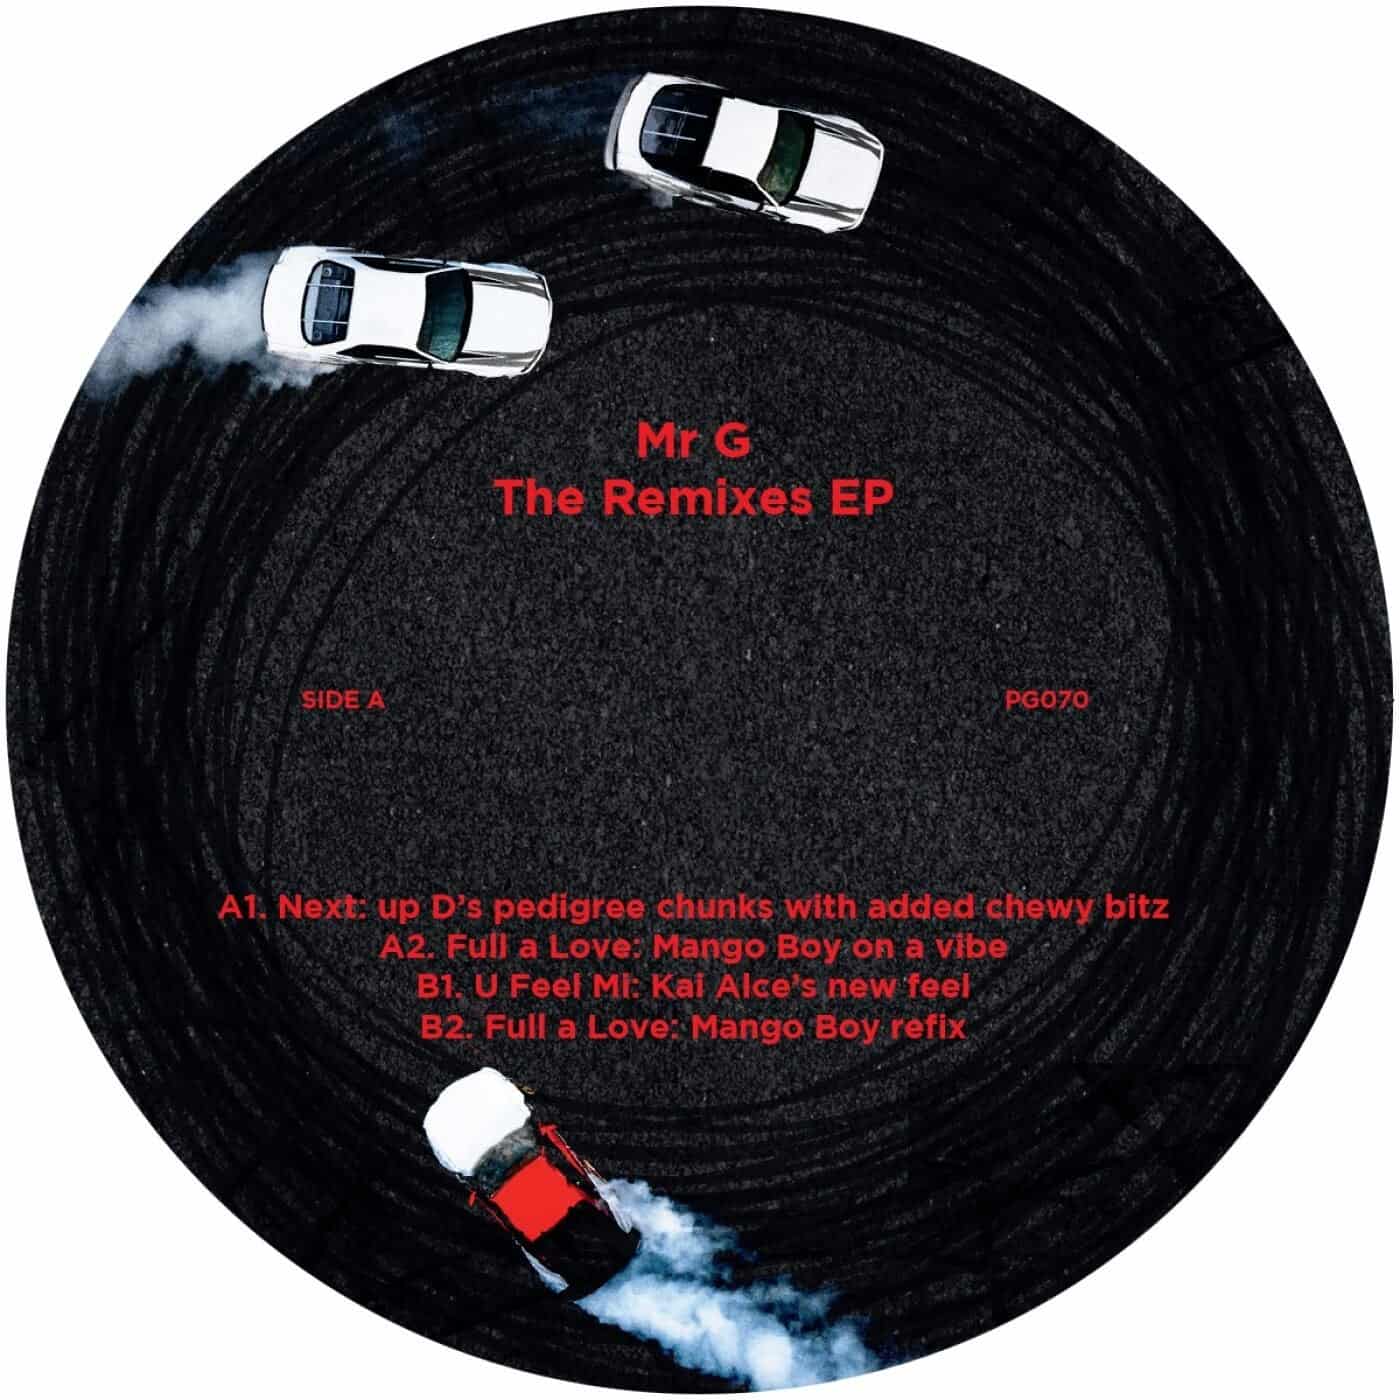 image cover: Mr. G - The Remixes EP / PG070